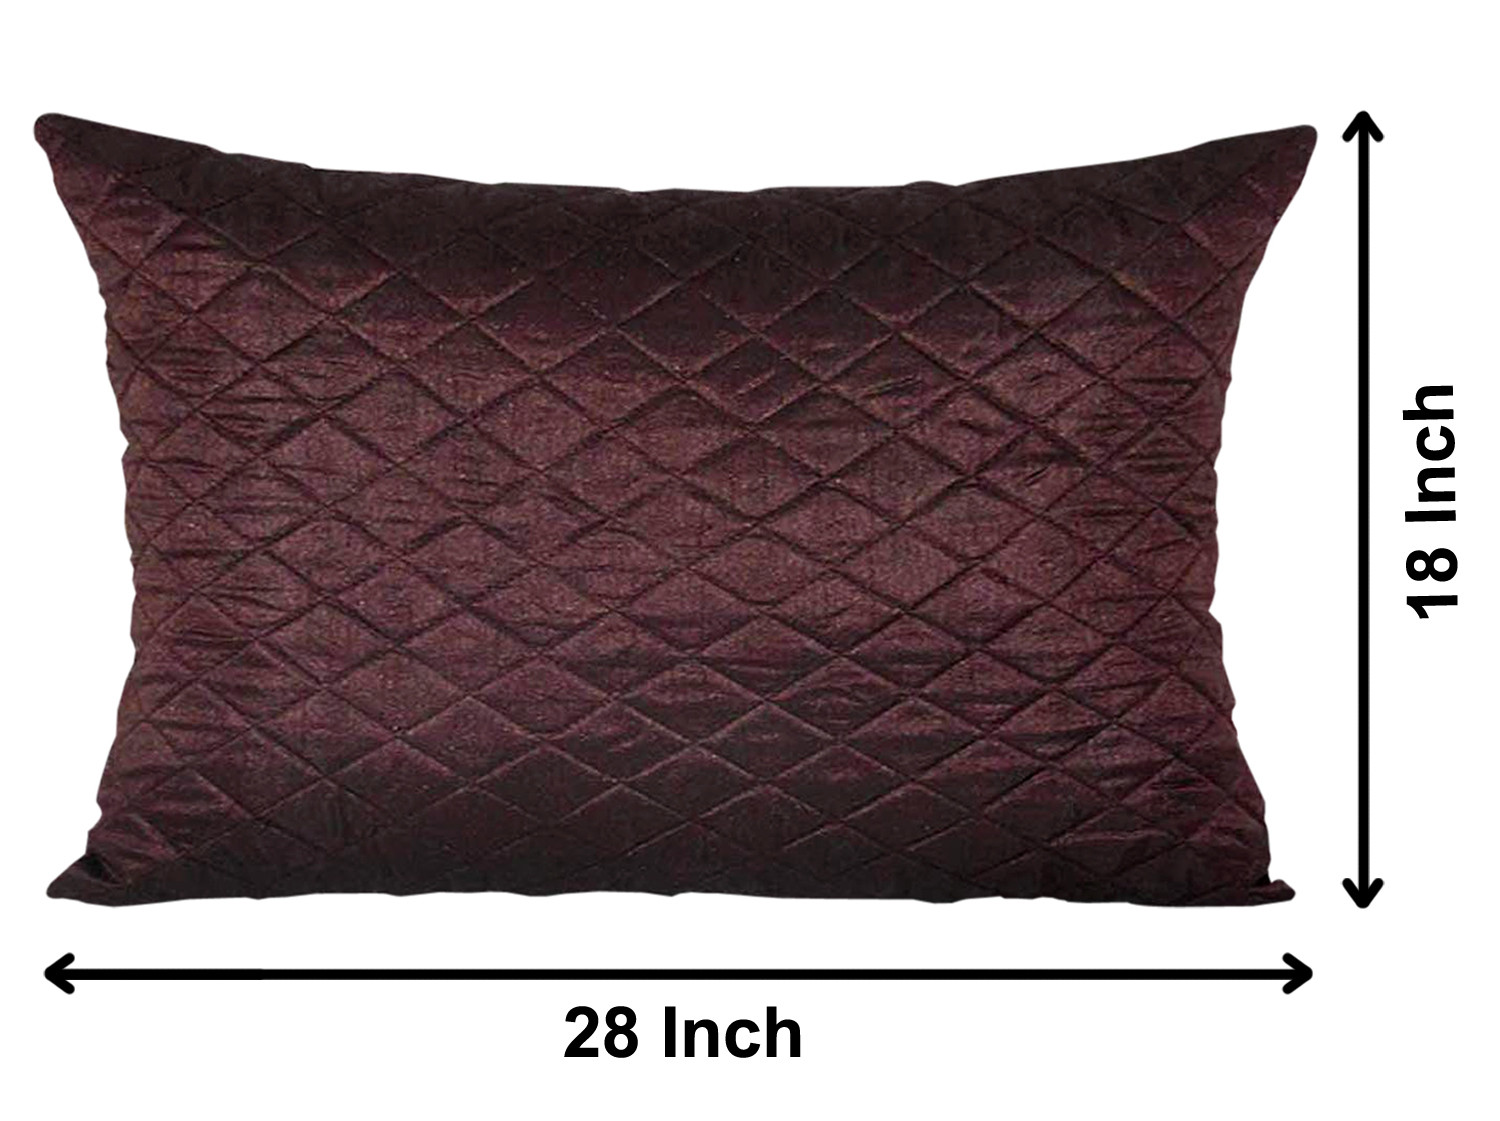 Kuber Industries Quilted Pillow Covers, 18 x 28 inch,(Maroon & Cream)-HS_38_KUBMART21773